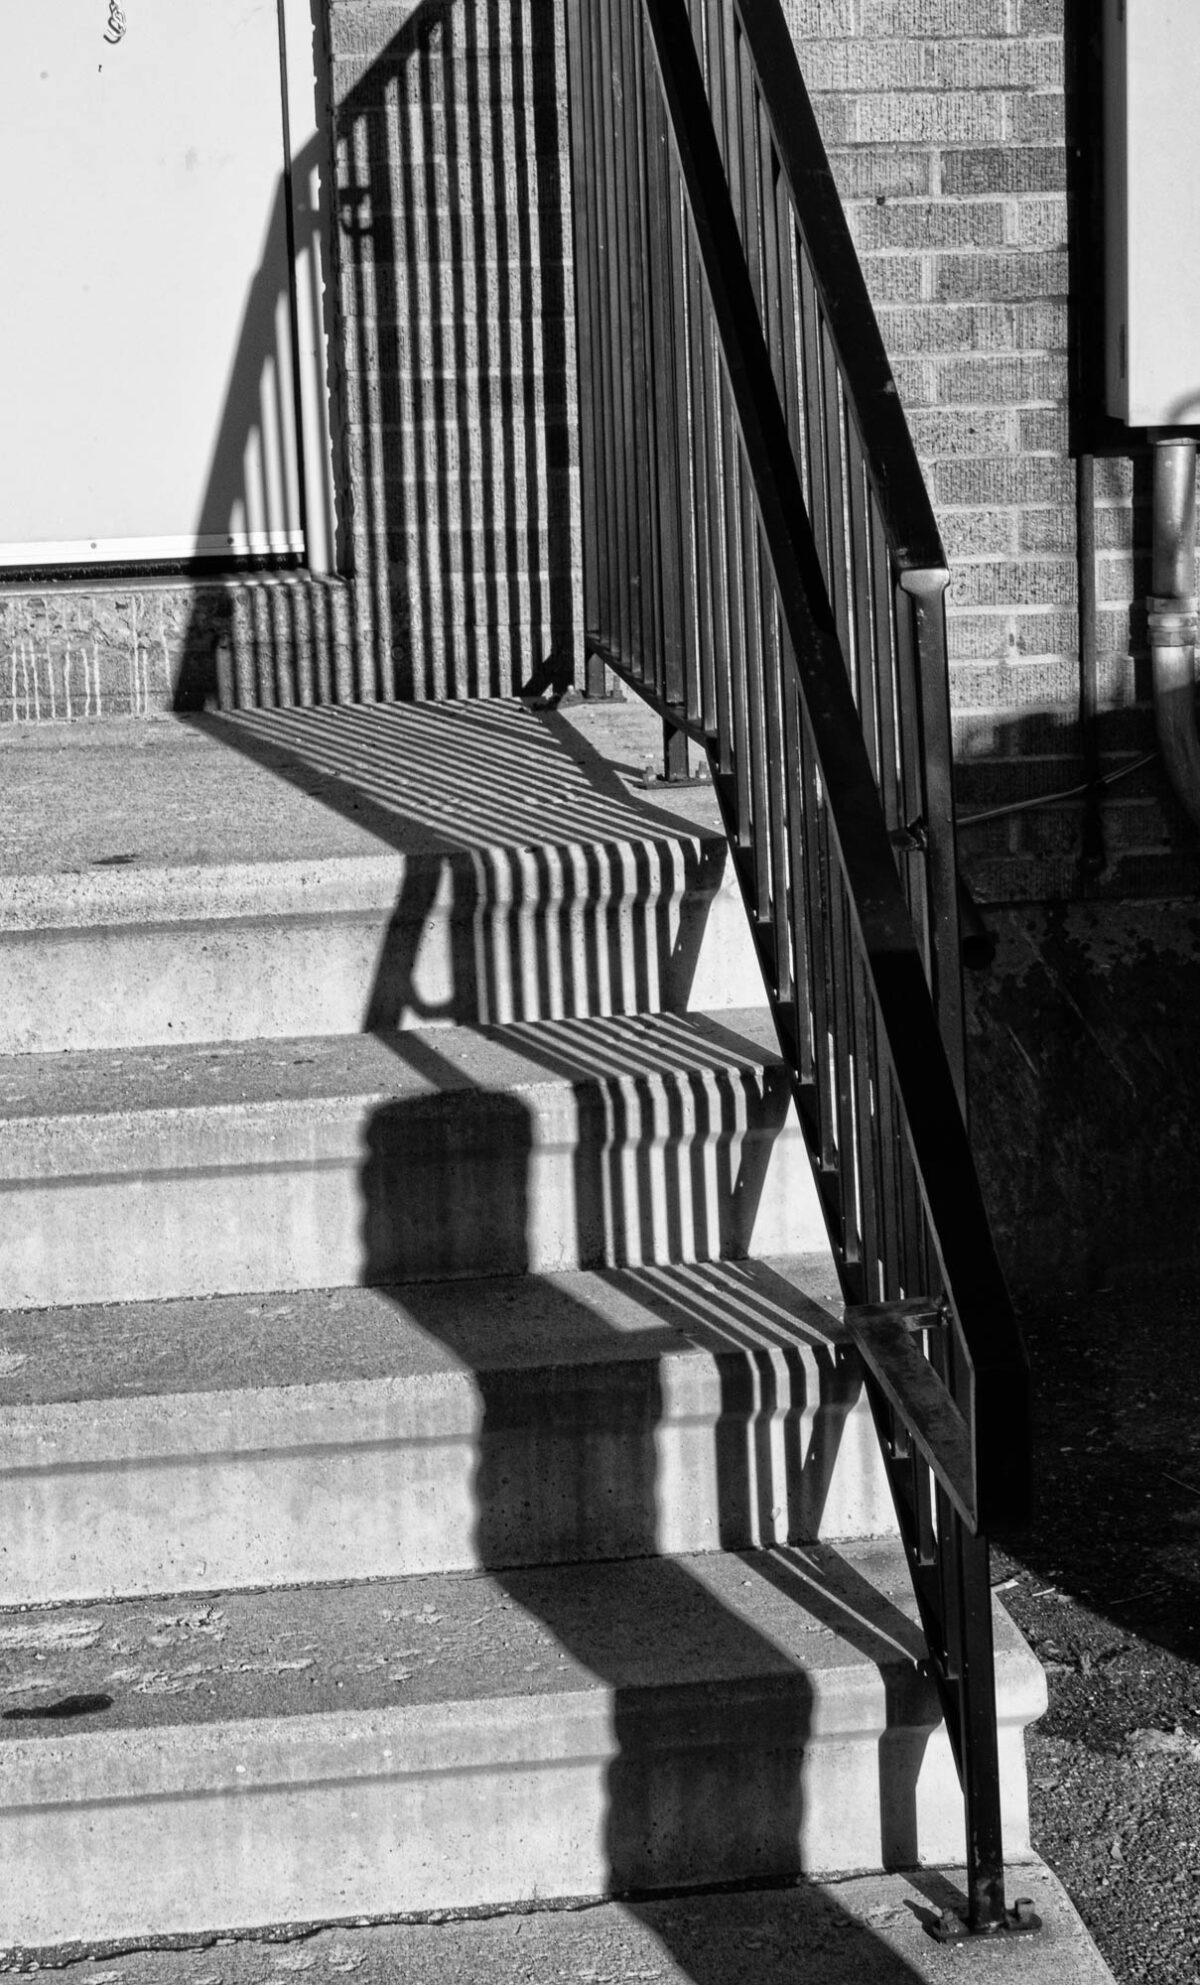 Stairs with the shadow of handrails.